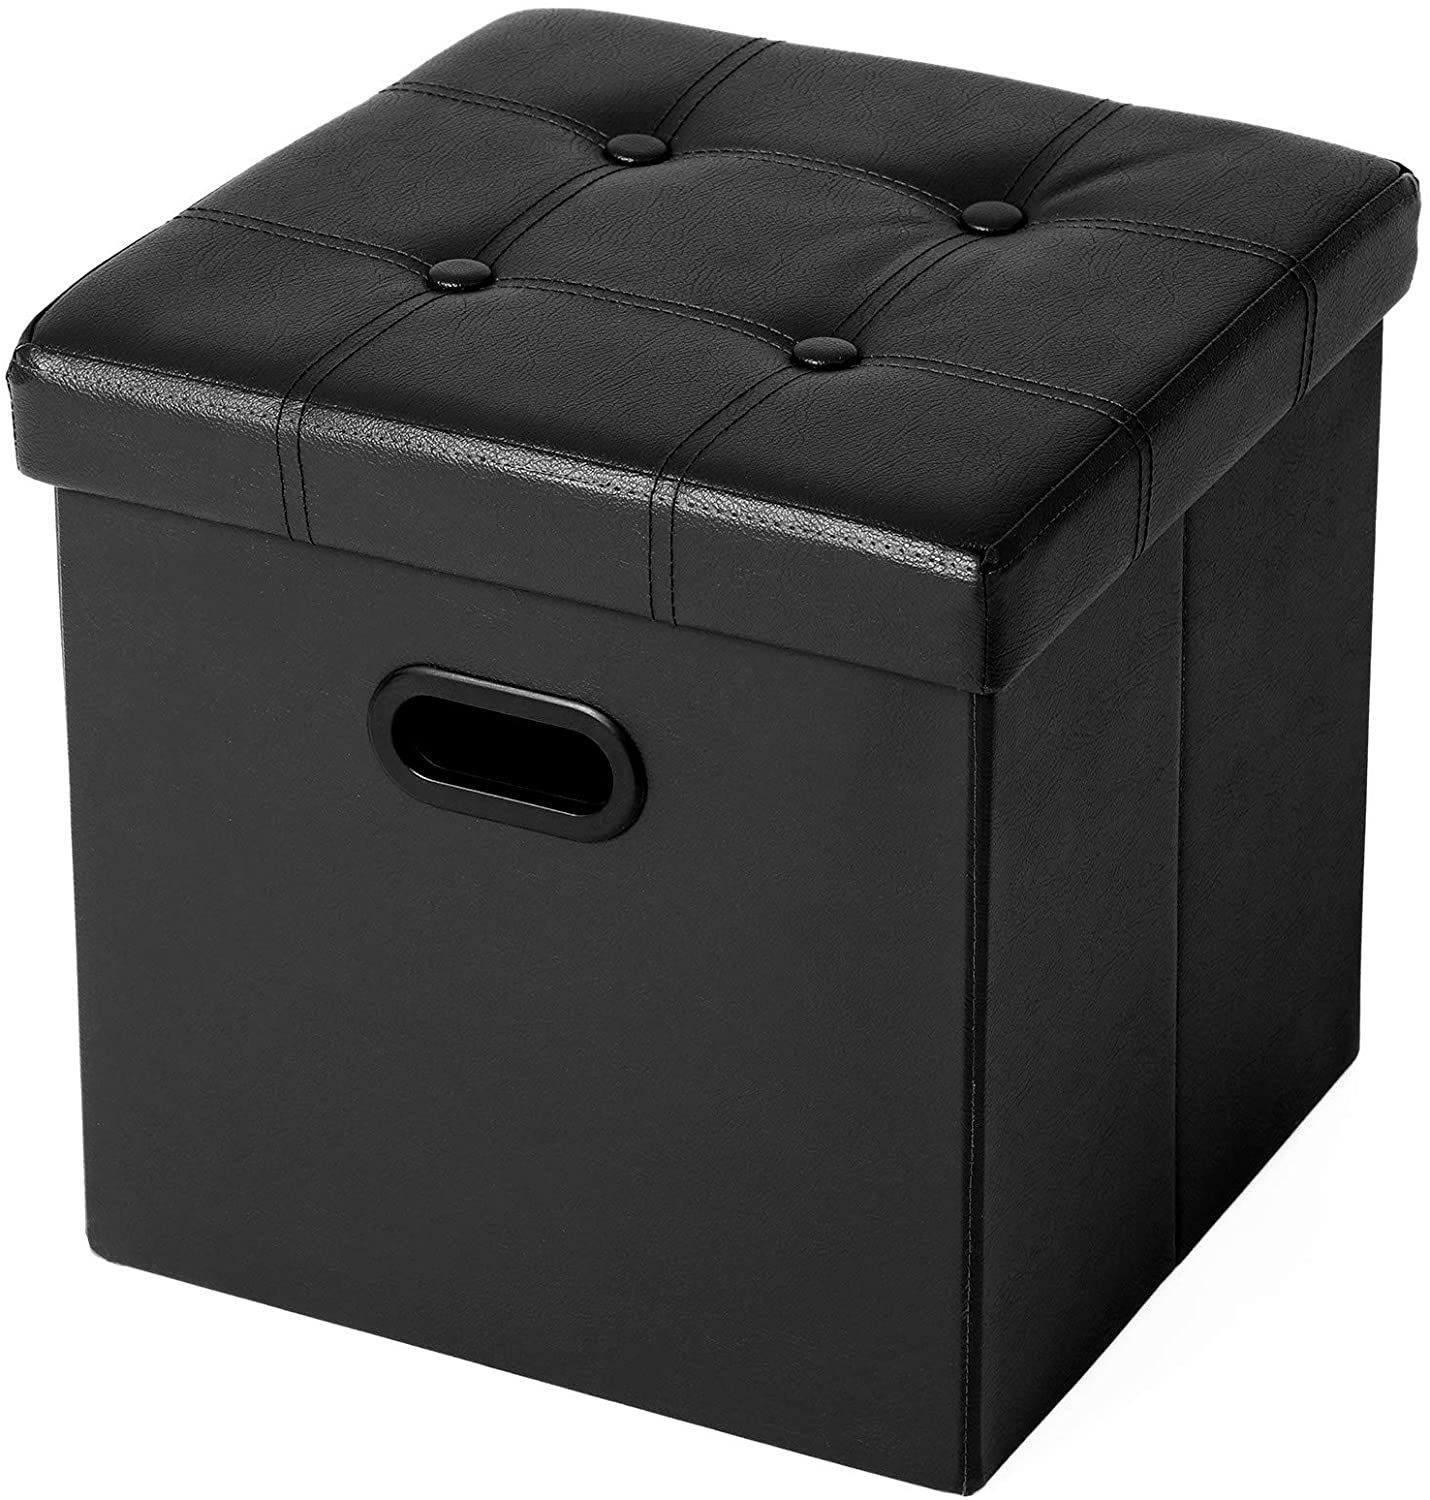 Songmics Folding Storage Ottoman, Cube Footrest, Puppy Step, Coffee Intended For Black Faux Leather Cube Ottomans (View 13 of 20)